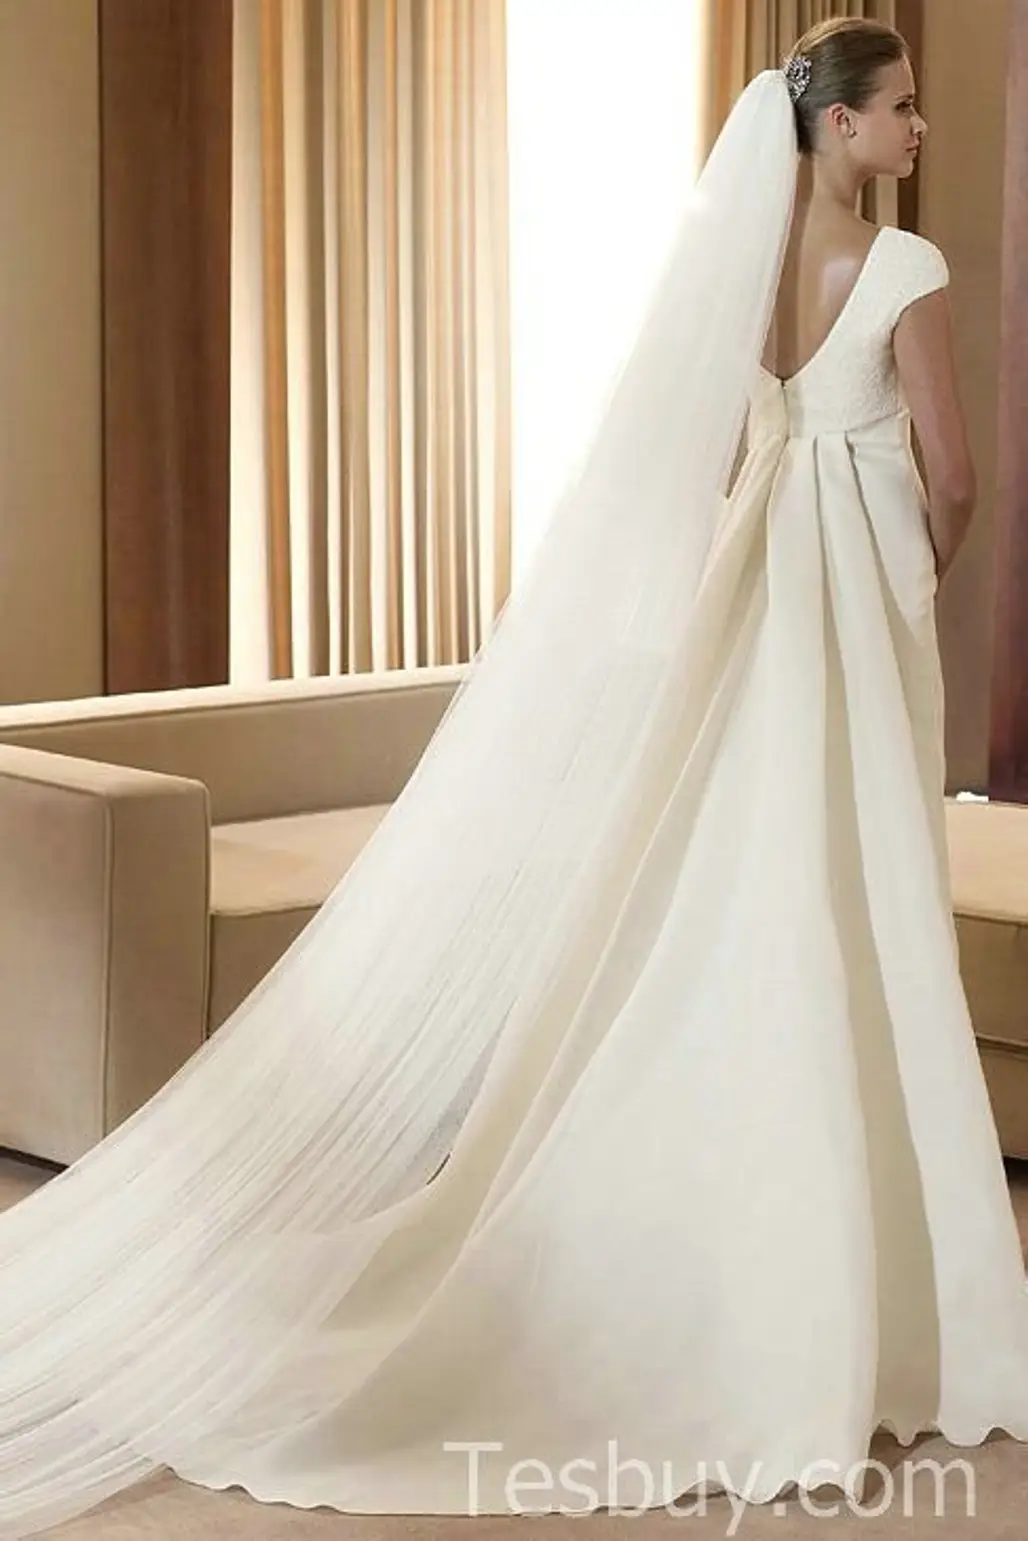 The Full Veil from the Back